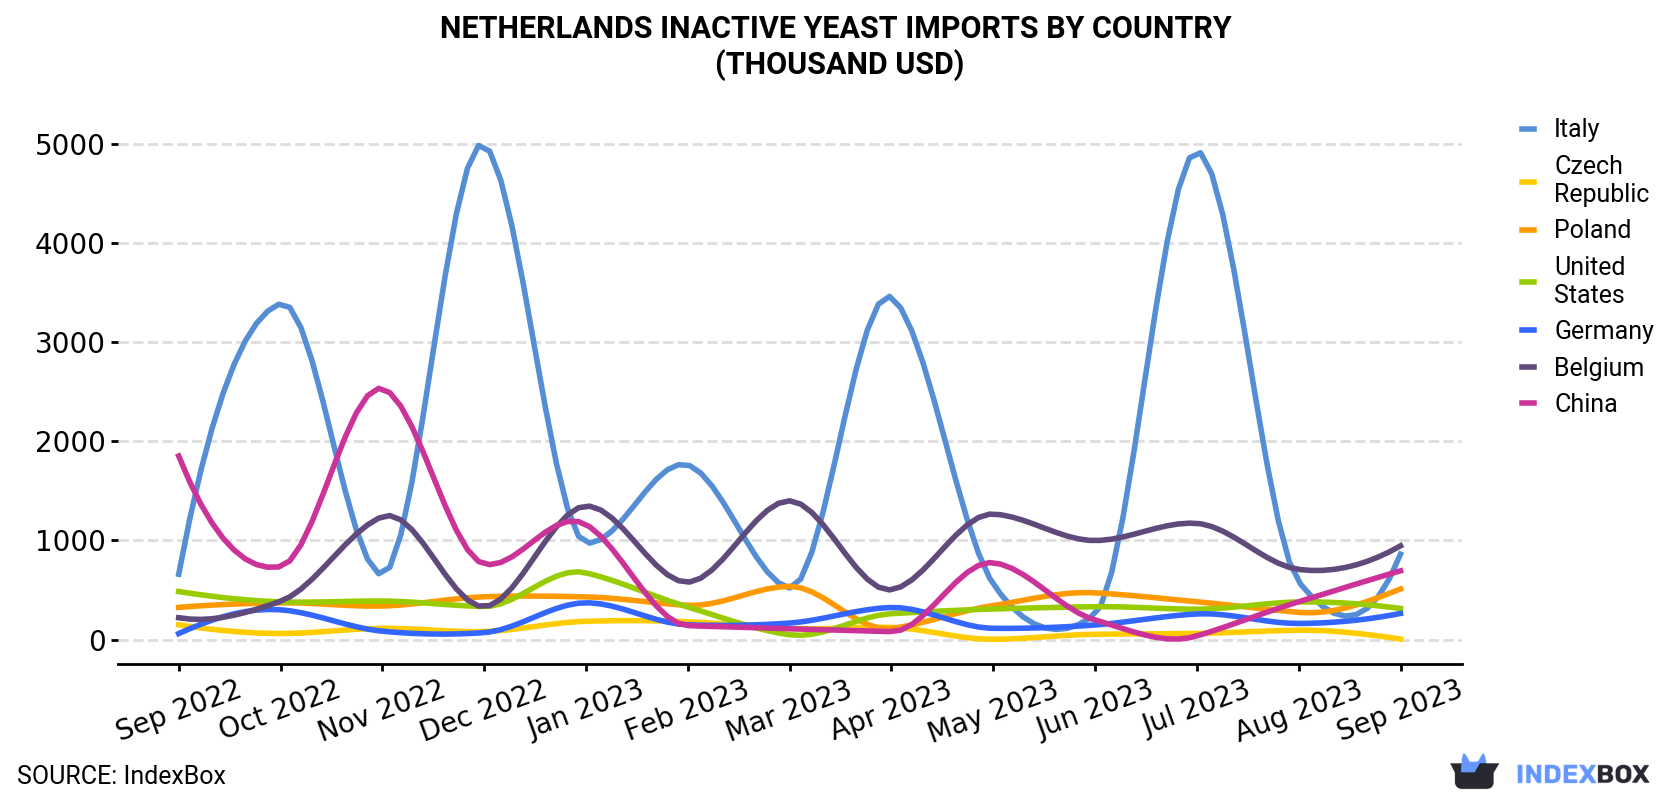 Netherlands Inactive Yeast Imports By Country (Thousand USD)